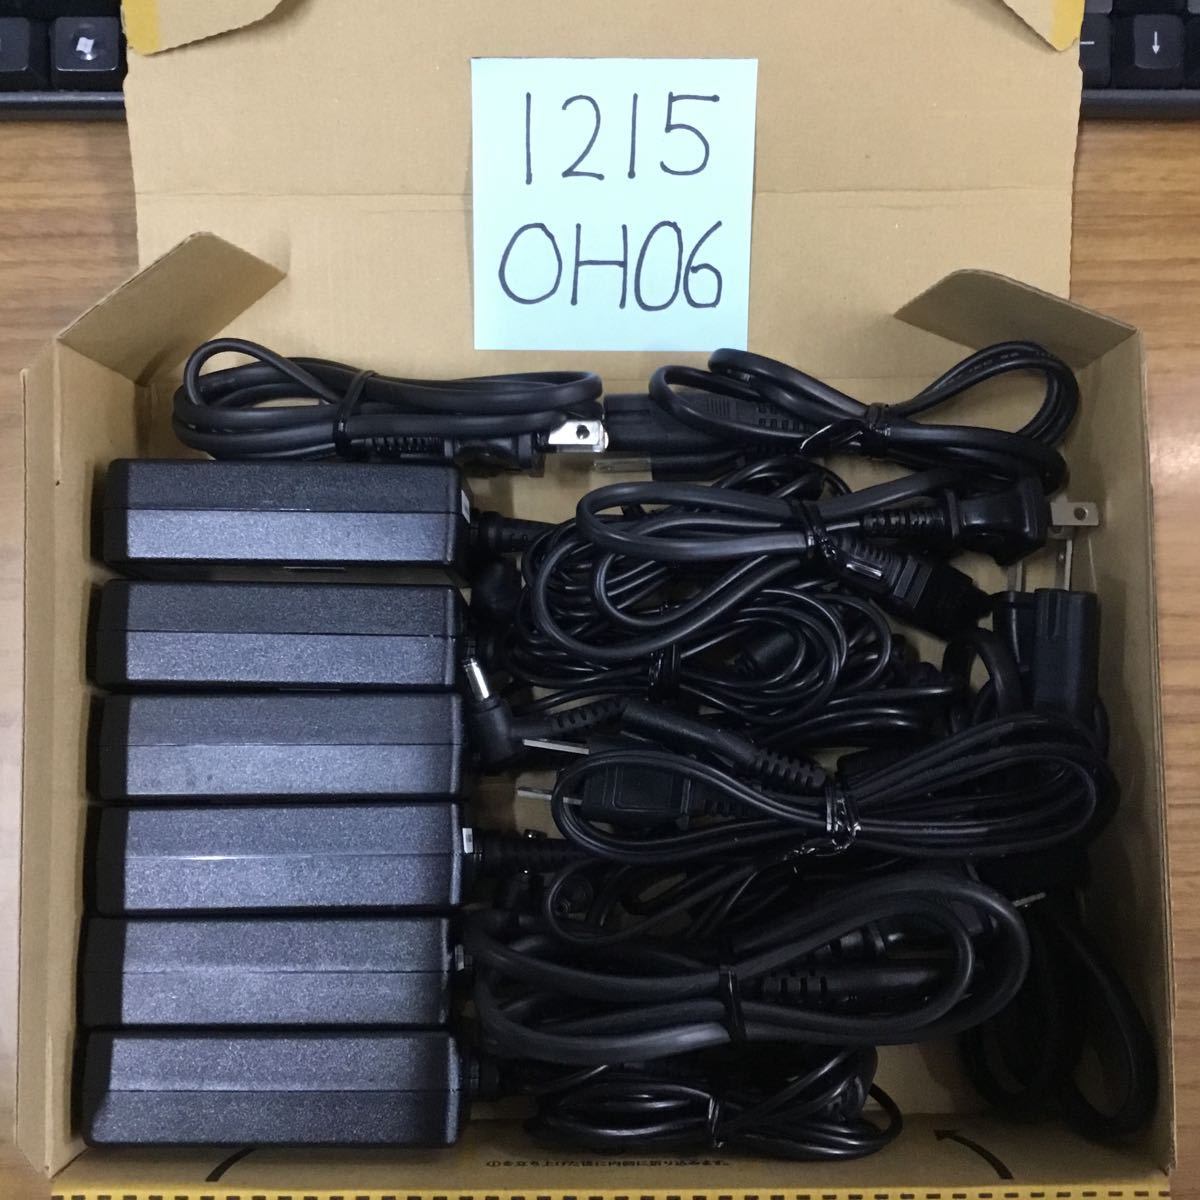 （1215OH06）送料無料/中古/Chicony チコニー/A12-040N2A/19V/2.1A/純正 ACアダプタ 6個セット_画像1